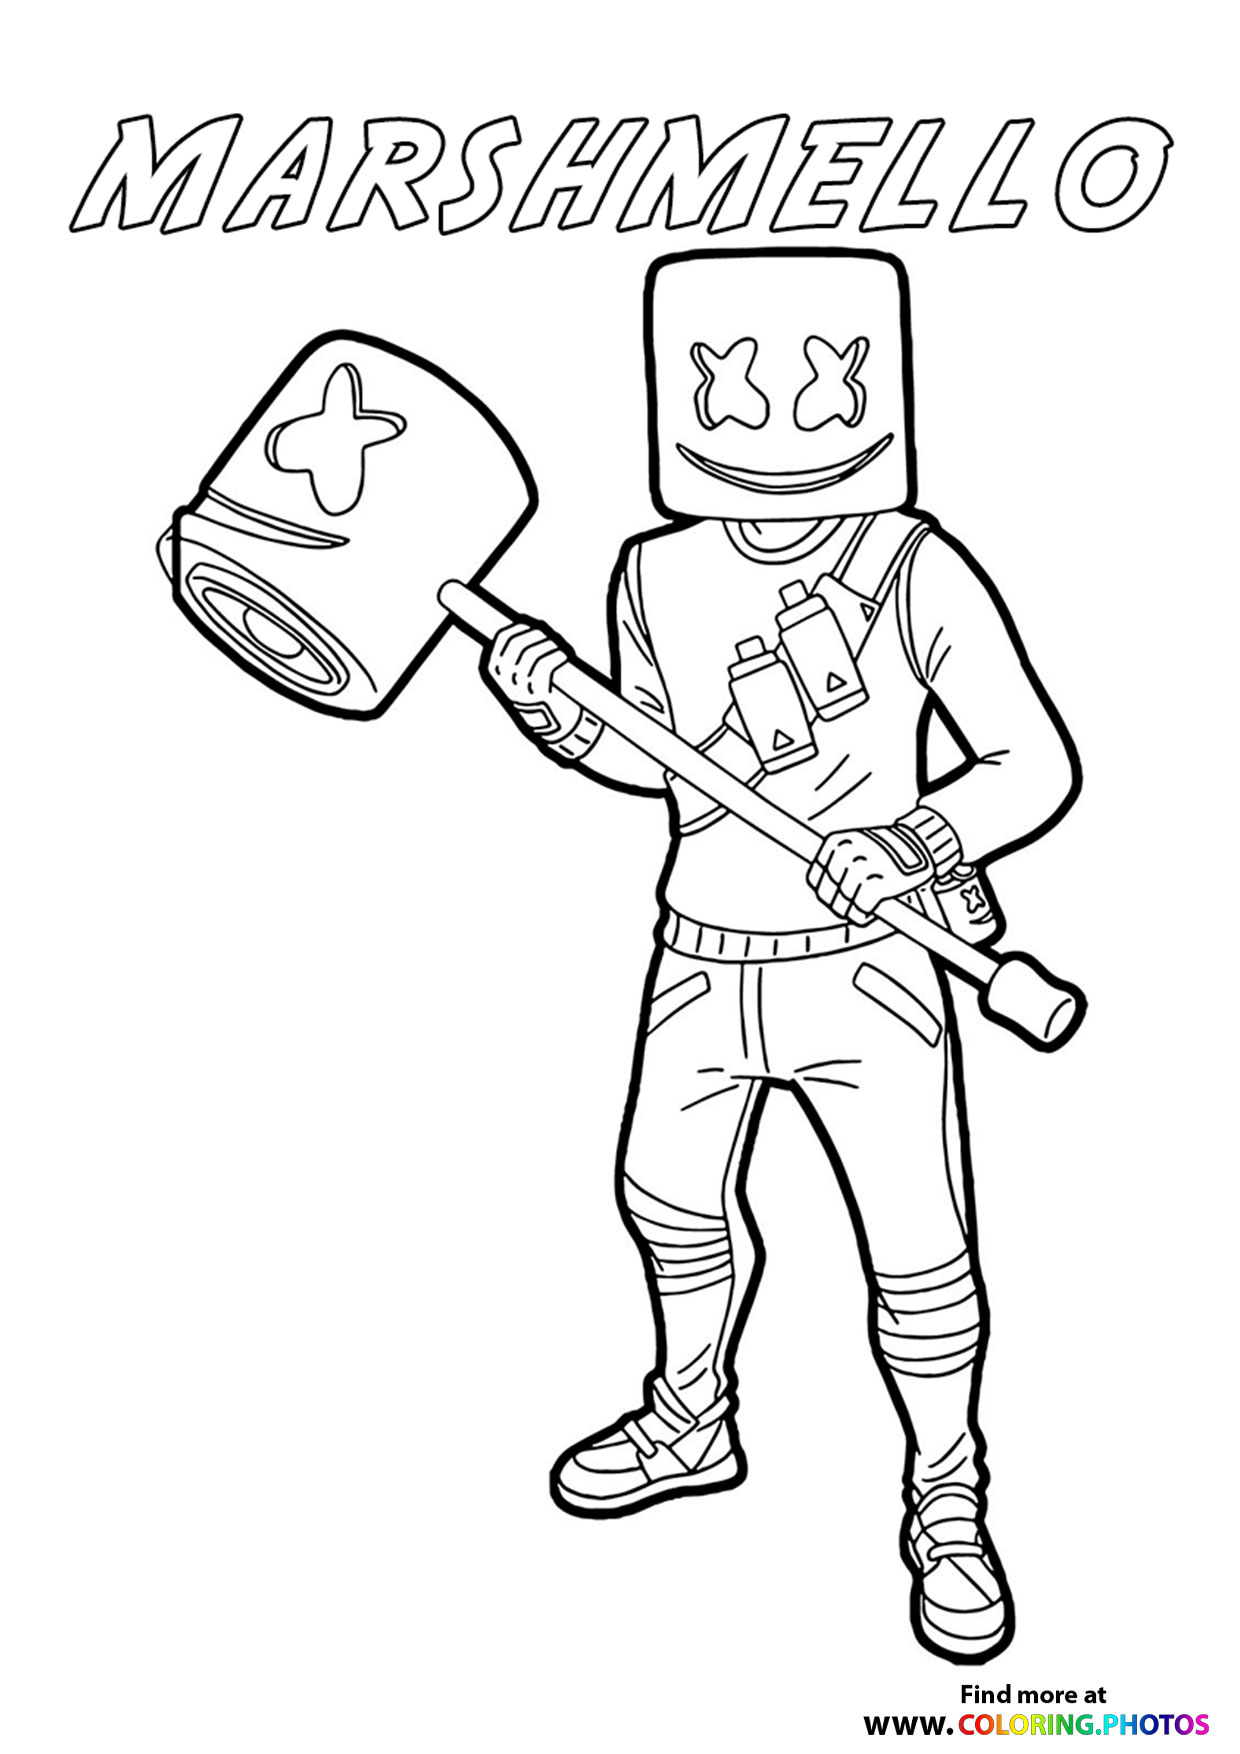 Marshmello with a bat   Fortnite   Coloring Pages for kids